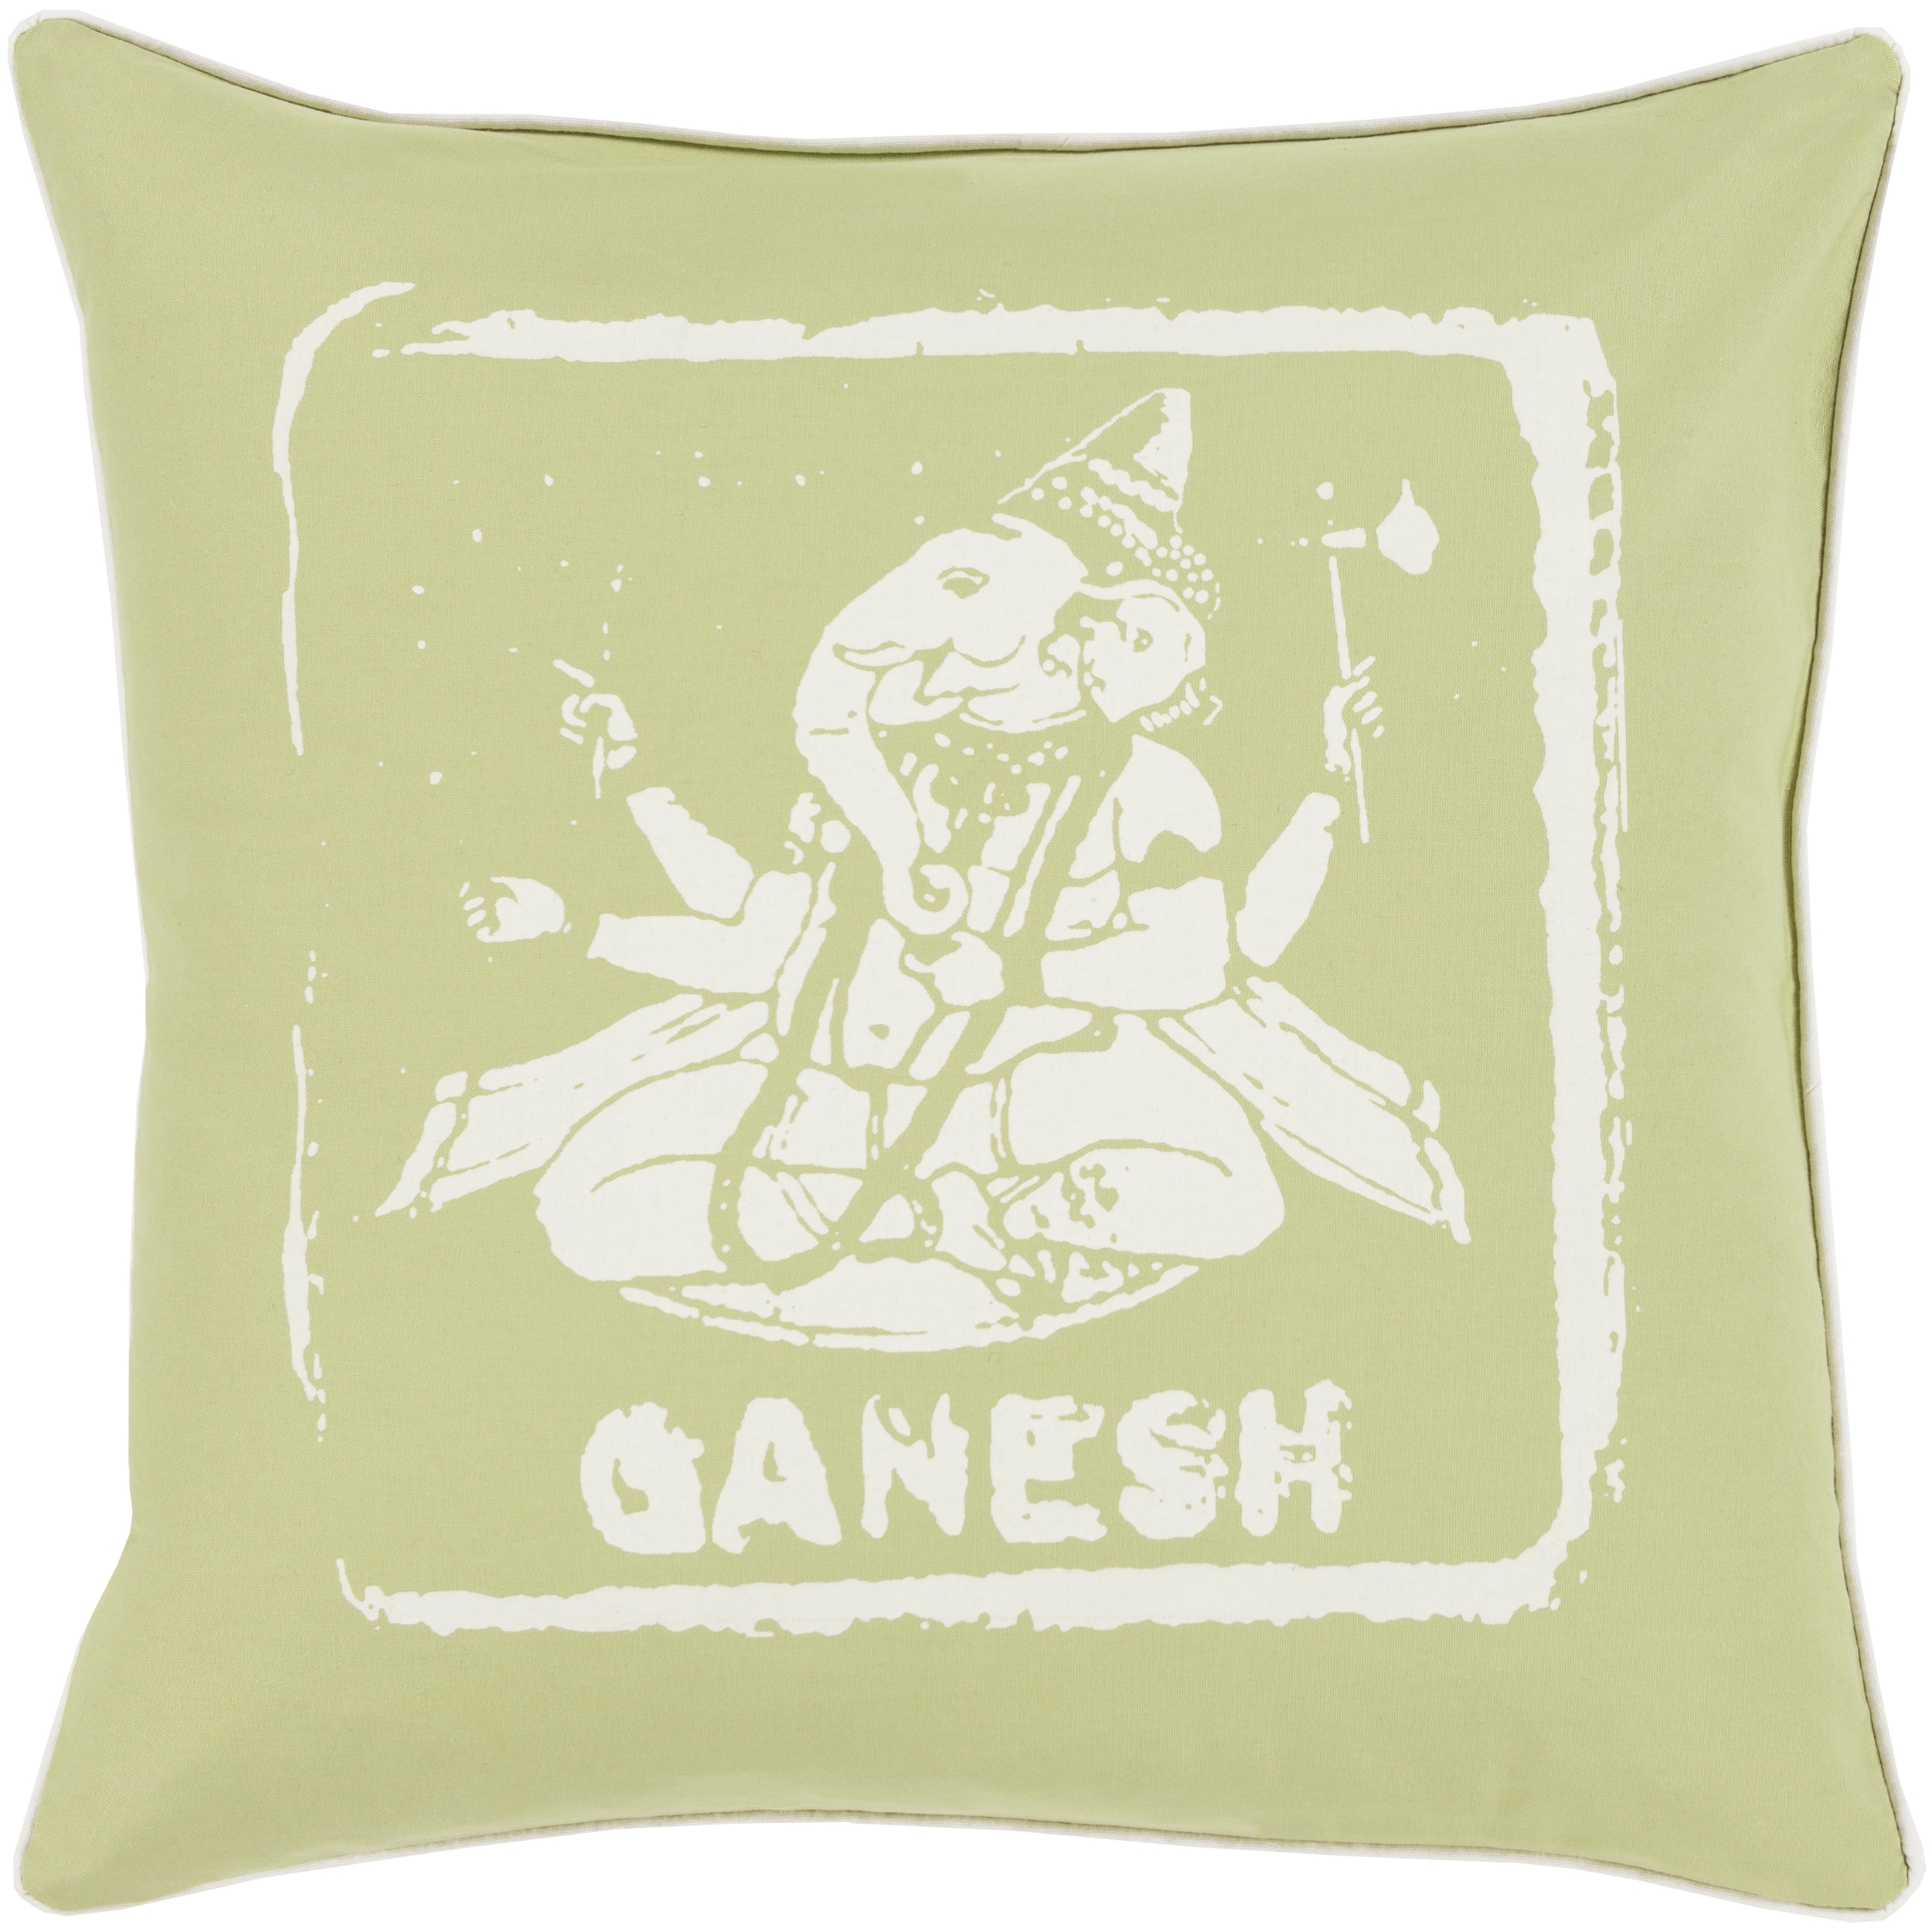 Upset Hindus urge “Bed Bath & Beyond” to withdraw Lord Ganesh pillows & apologize